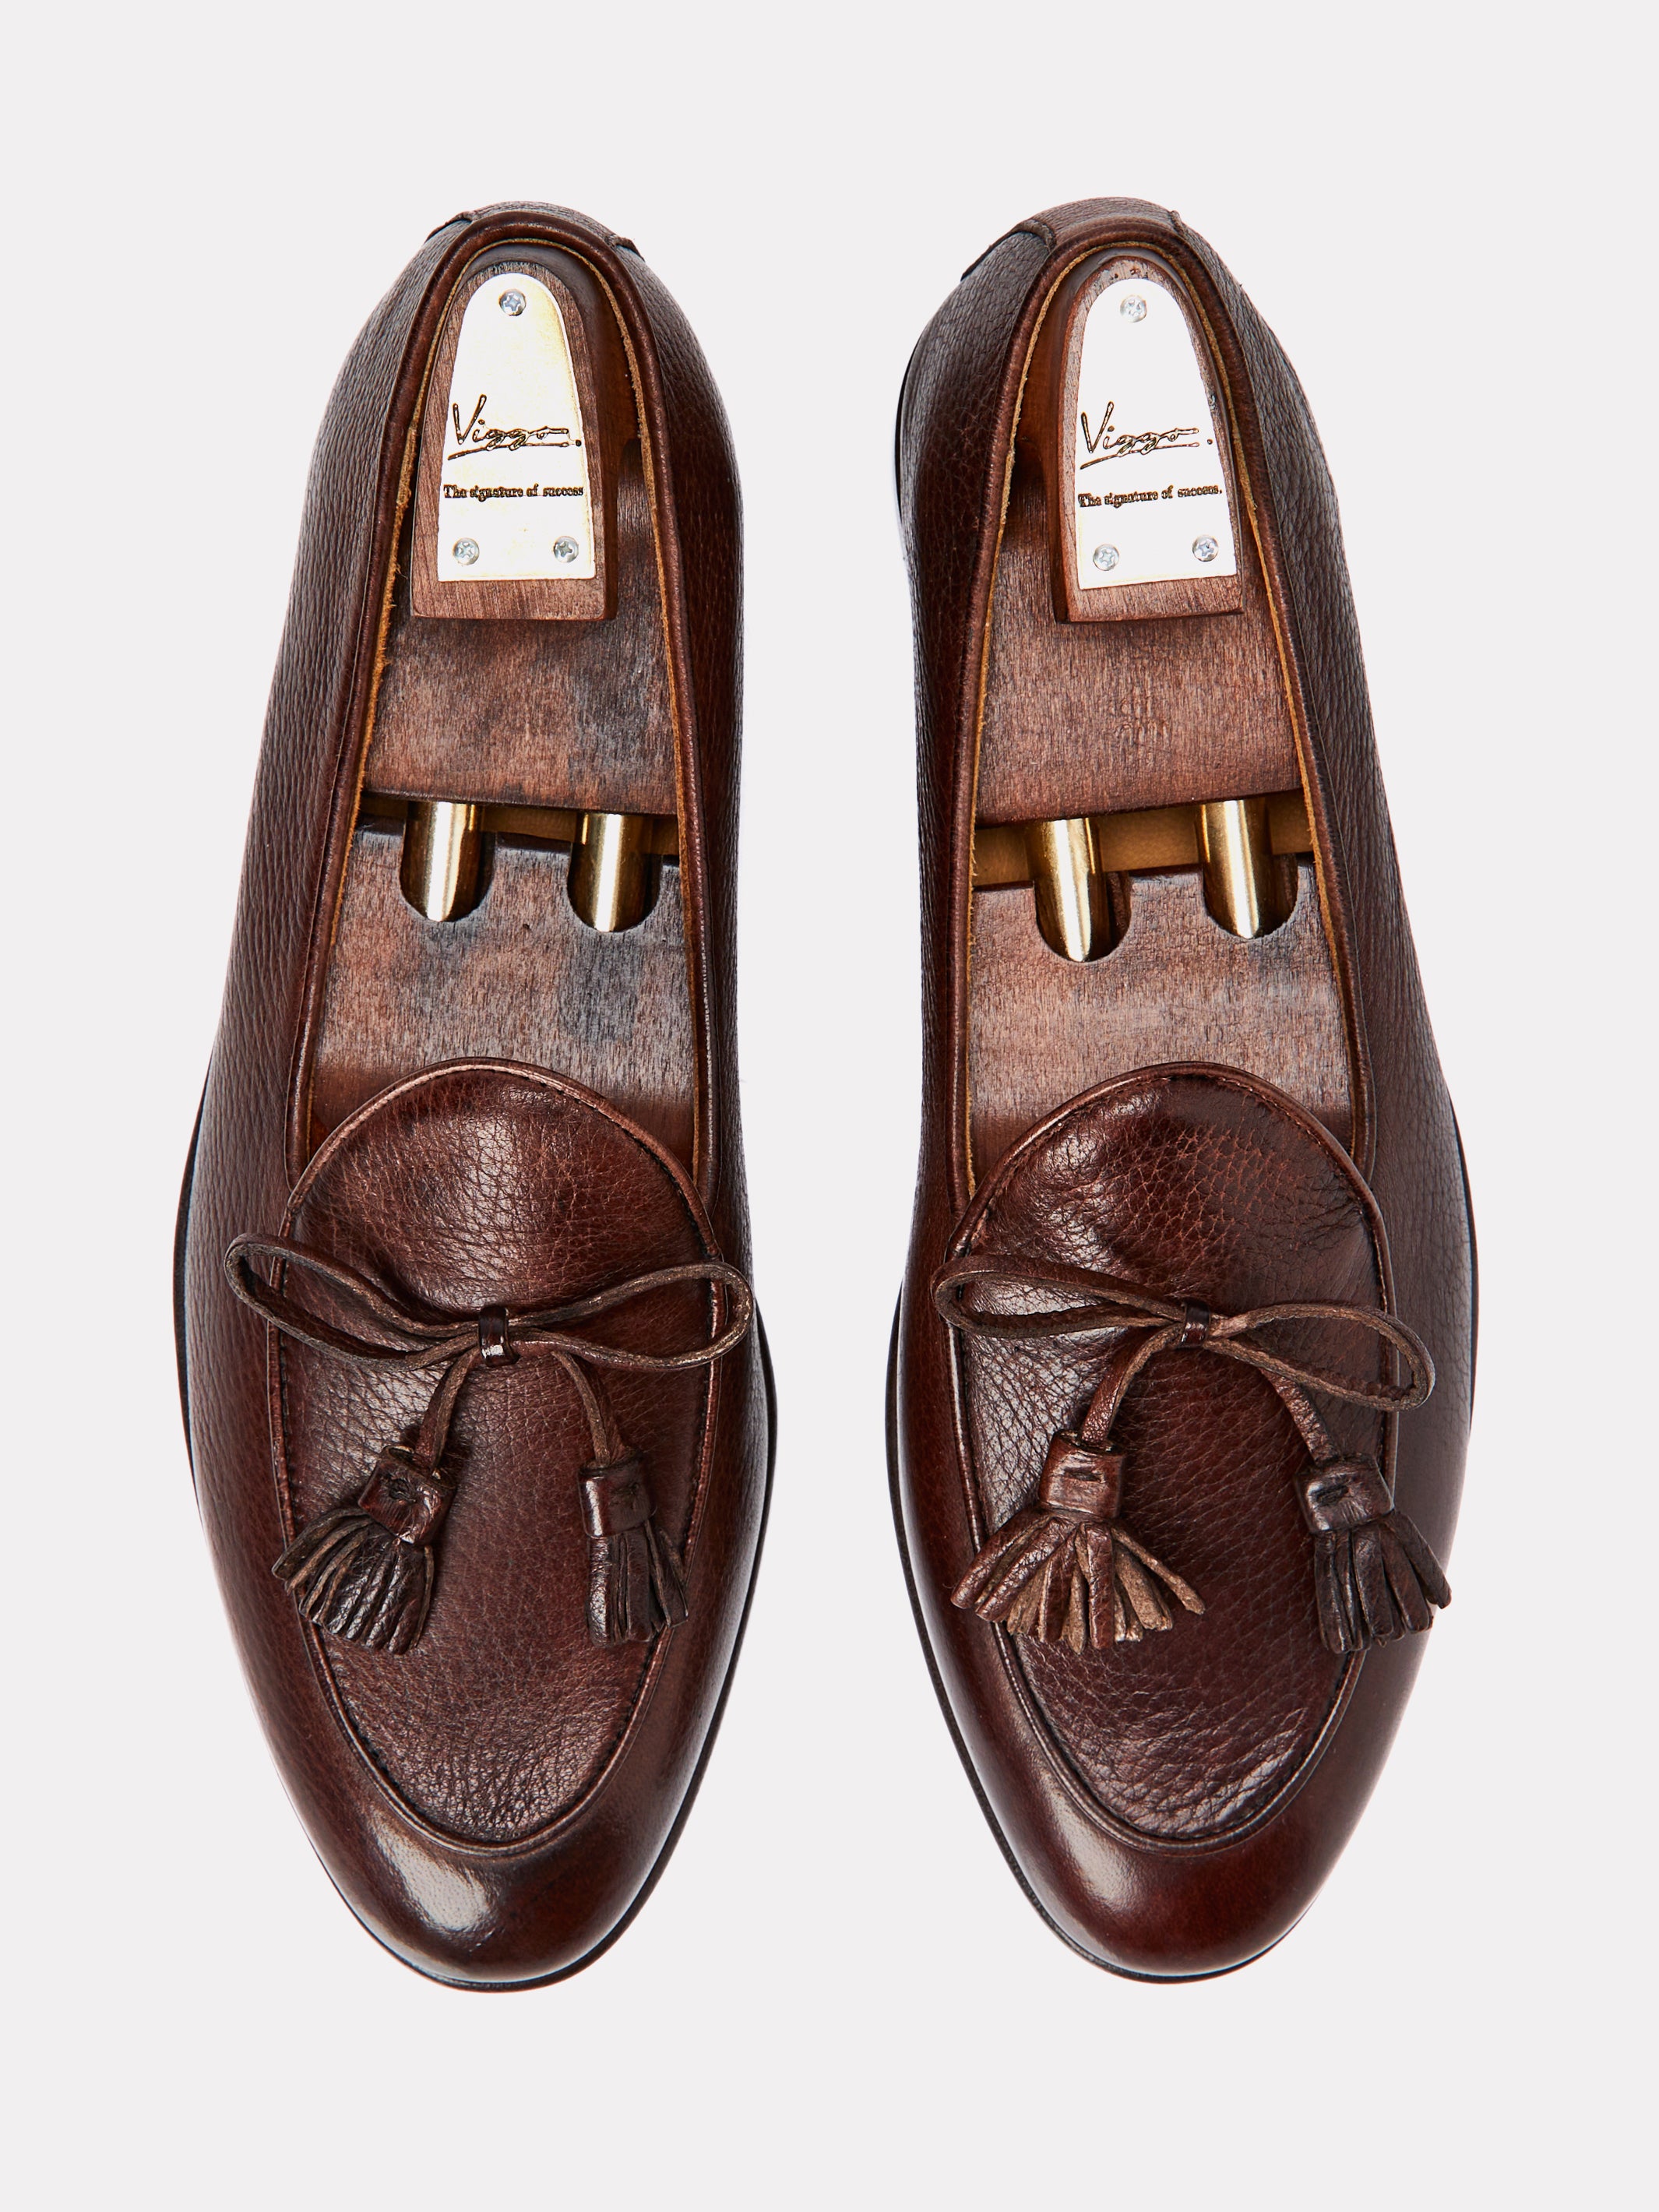 Loafer shoes with tassels